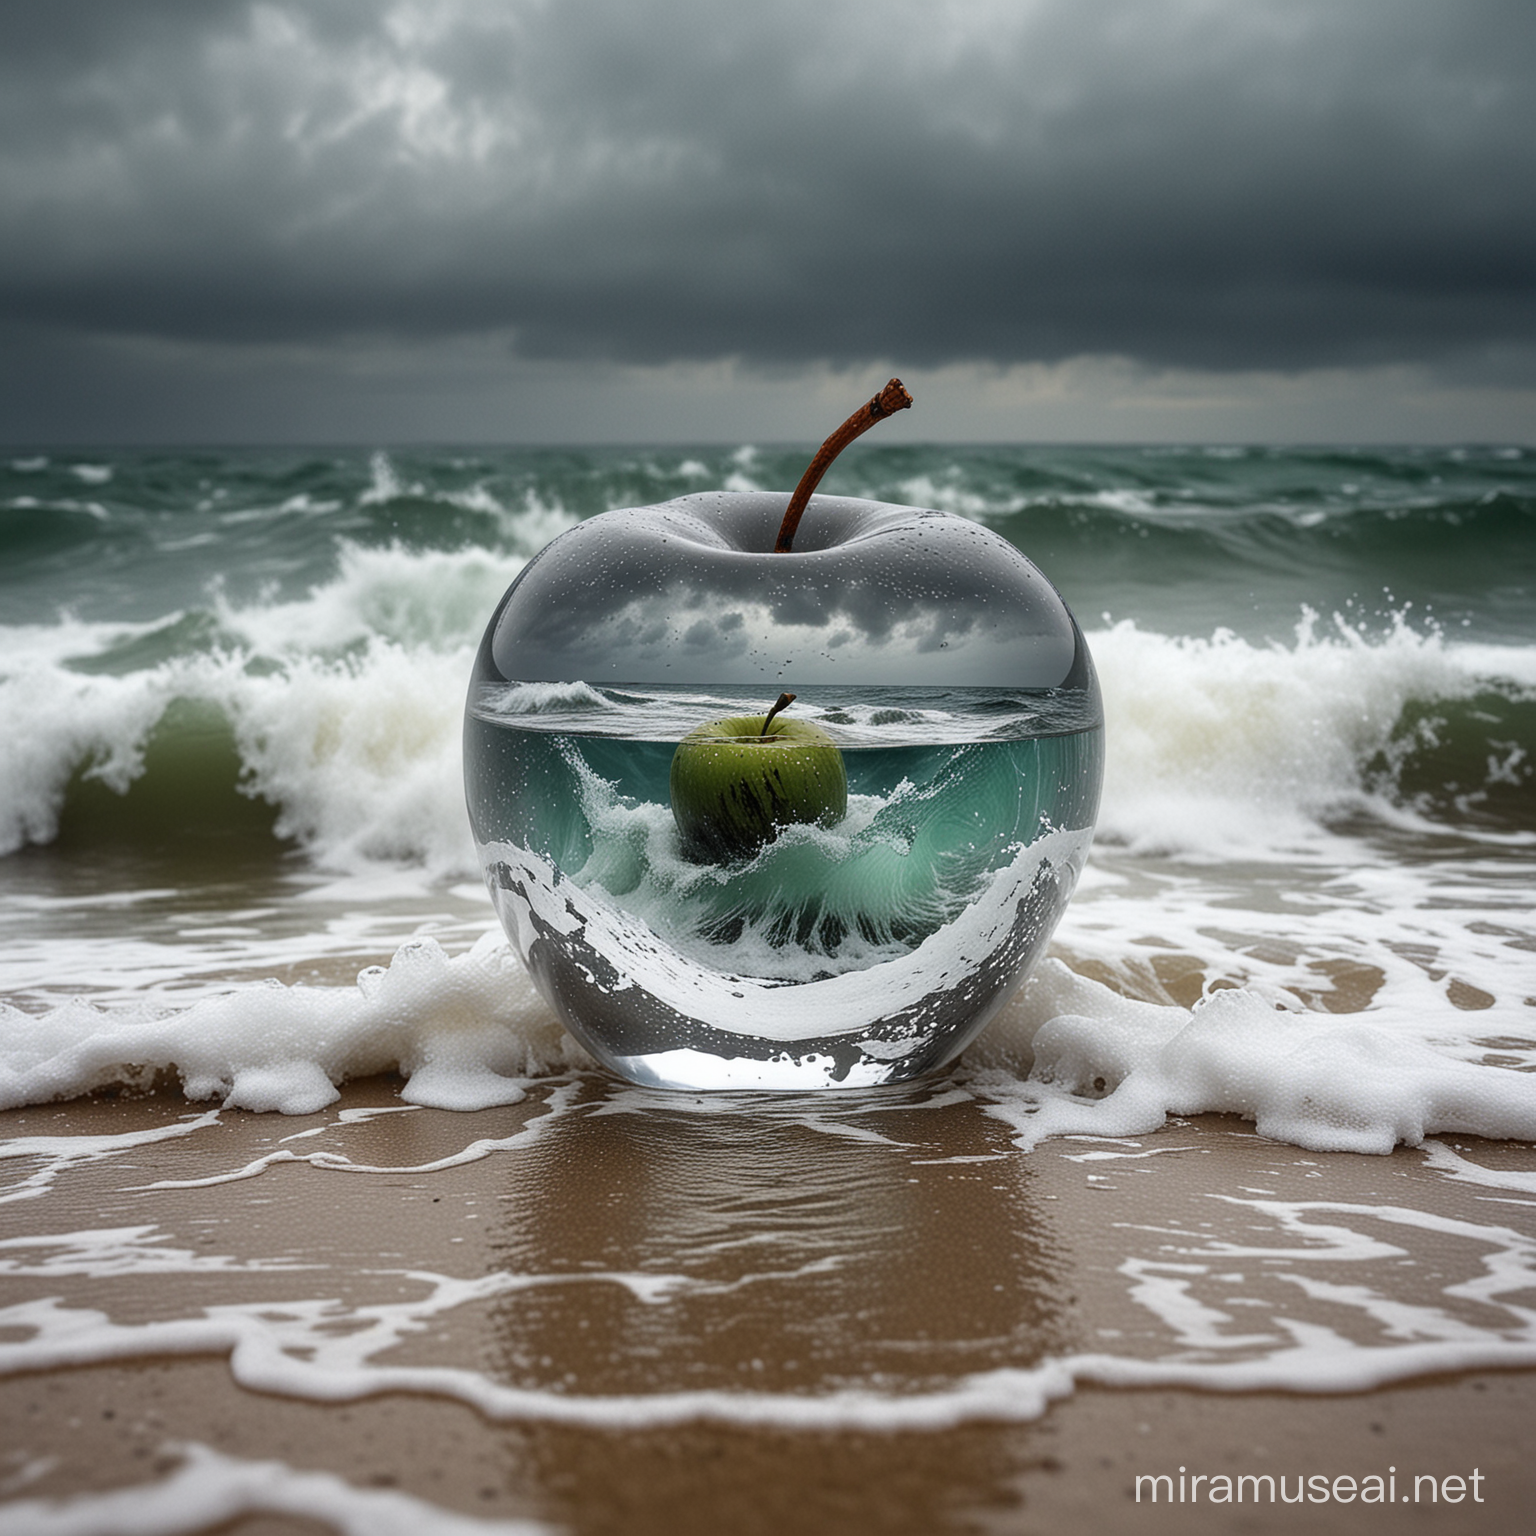 Surreal Transparent Apple with Stormy Miniature Sea Inside